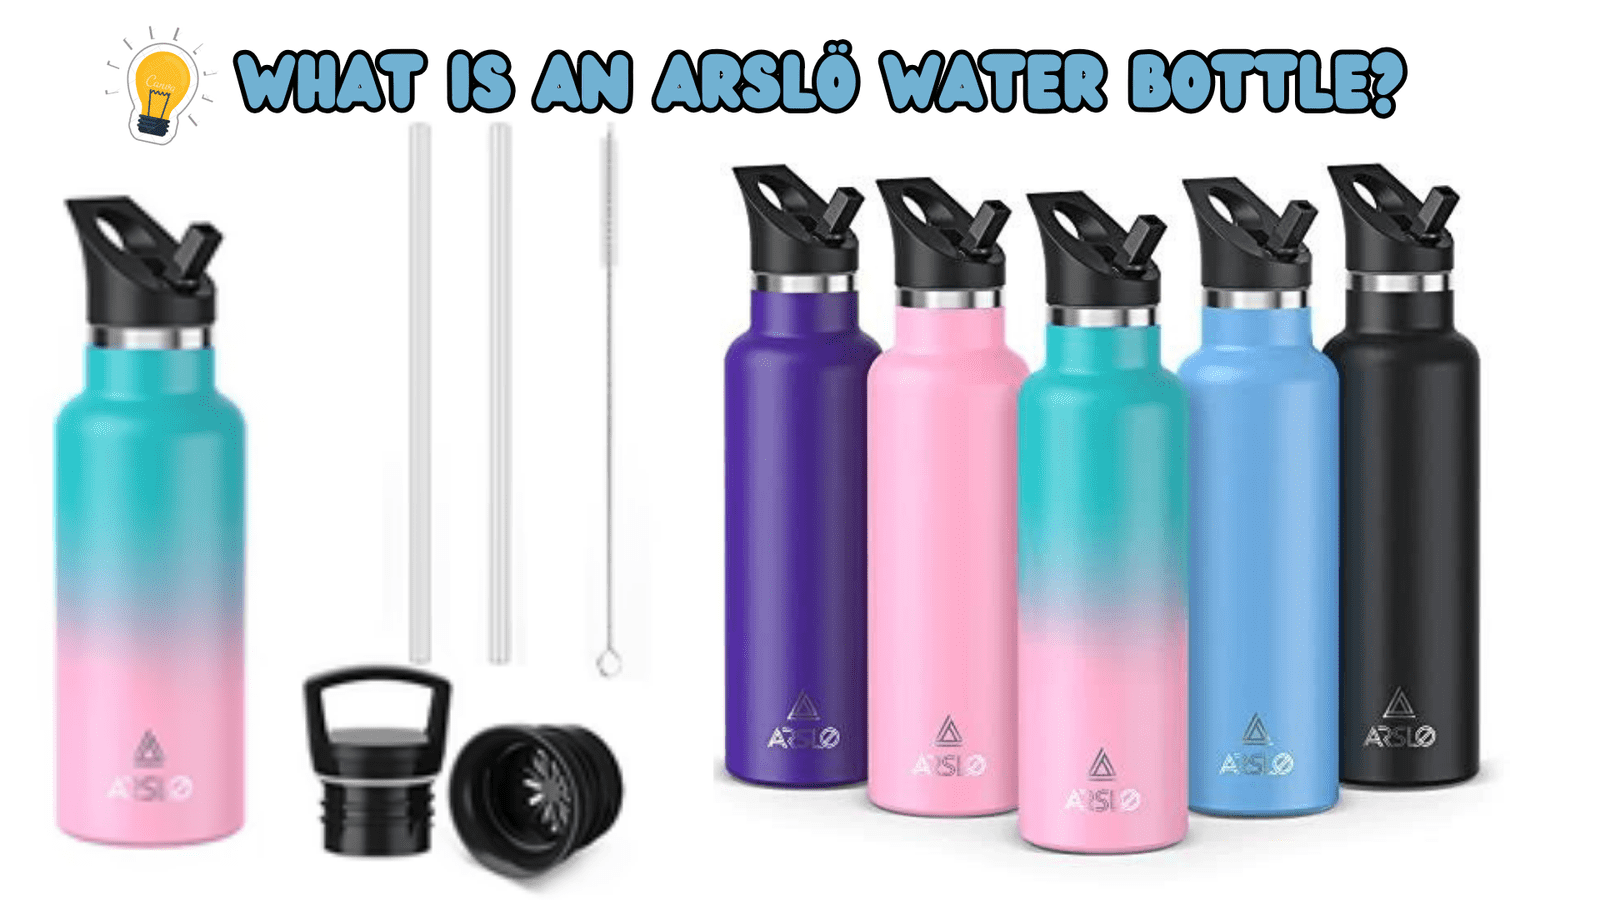 What is an Arslö Water Bottle